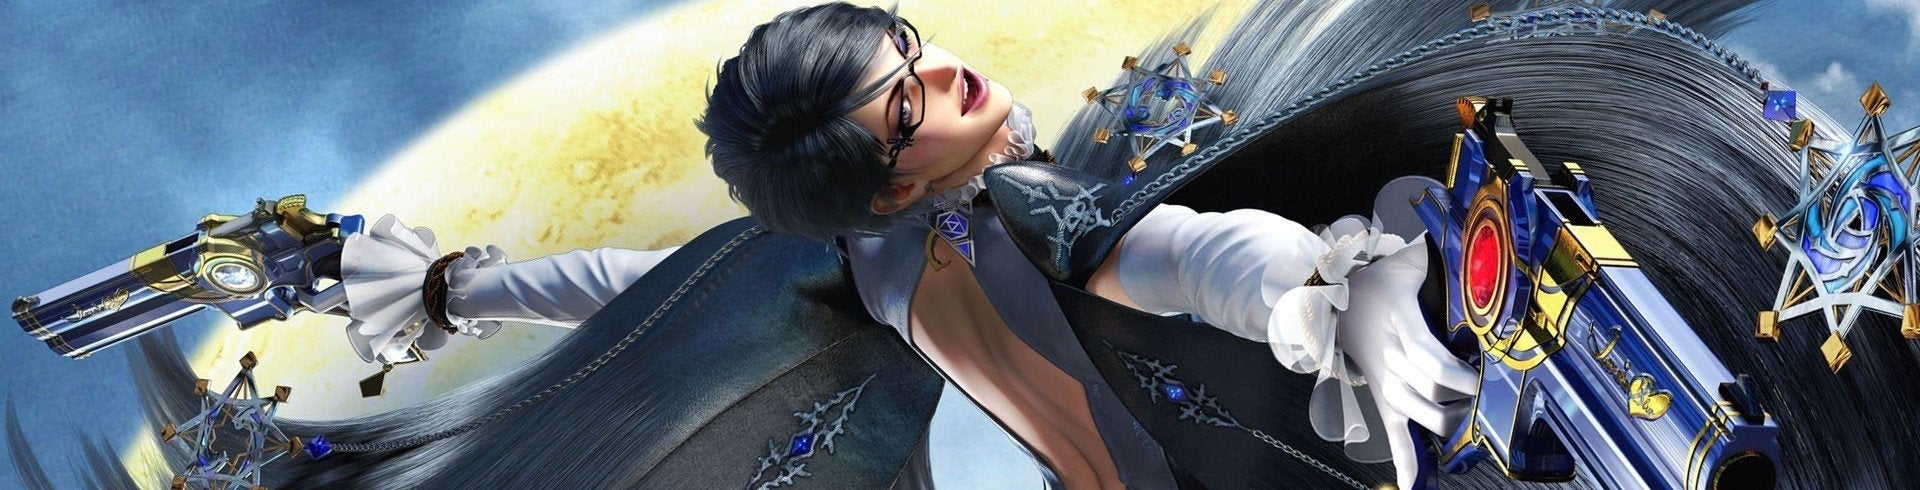 Image for Bayonetta 2 is a sequel to savour